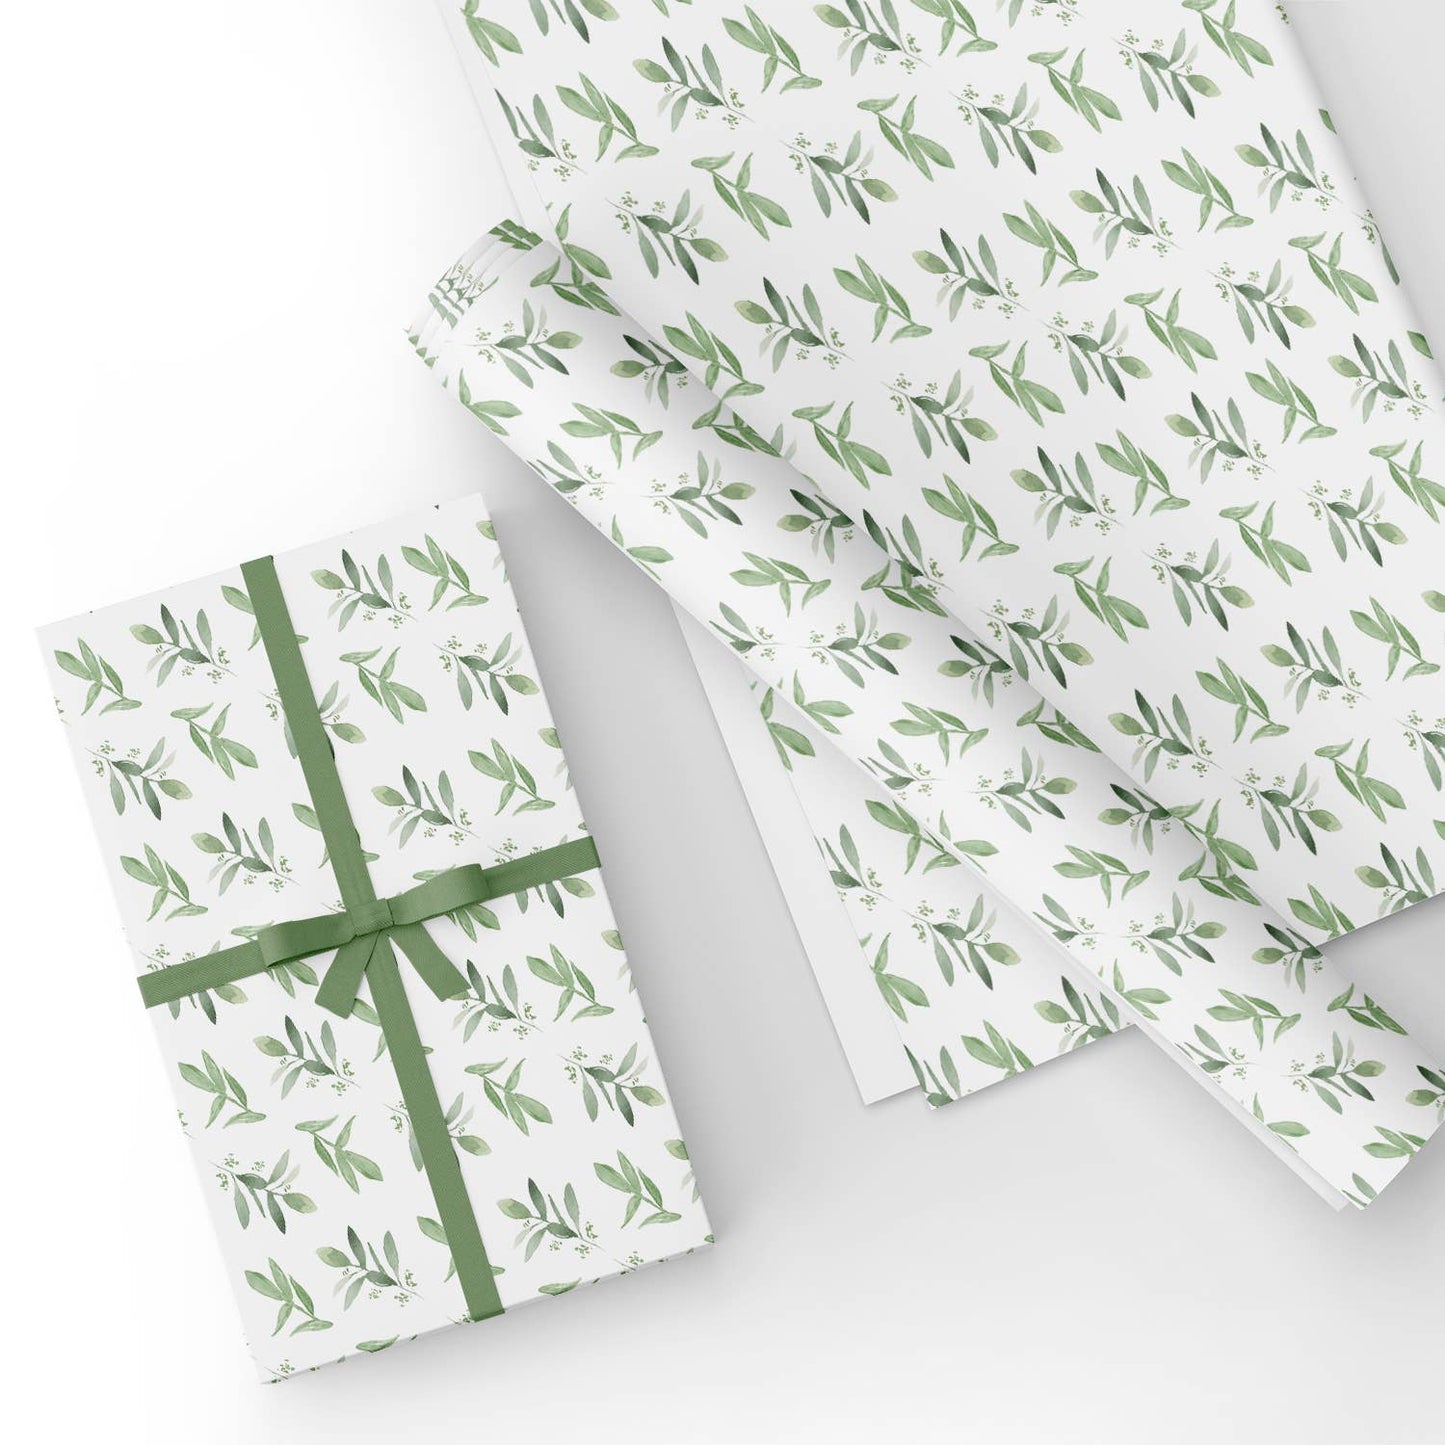 Watercolor Green Leaf Flat Wrapping Paper Sheet Wholesale Wraphaholic